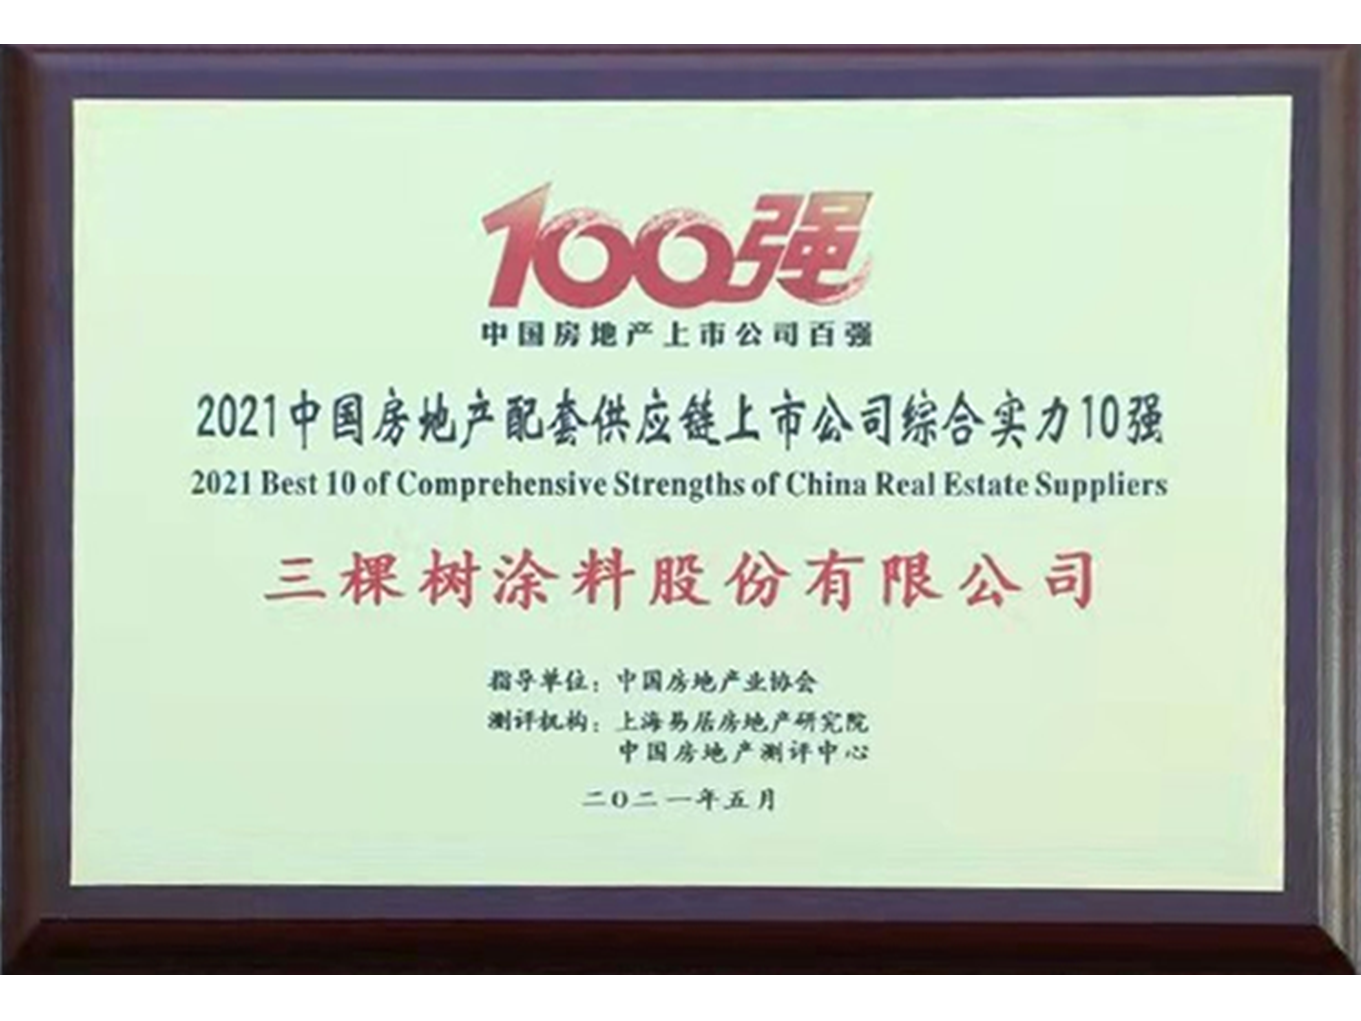 Top 10 comprehensive strength of listed companies in China’s real estate supply chain in 2021